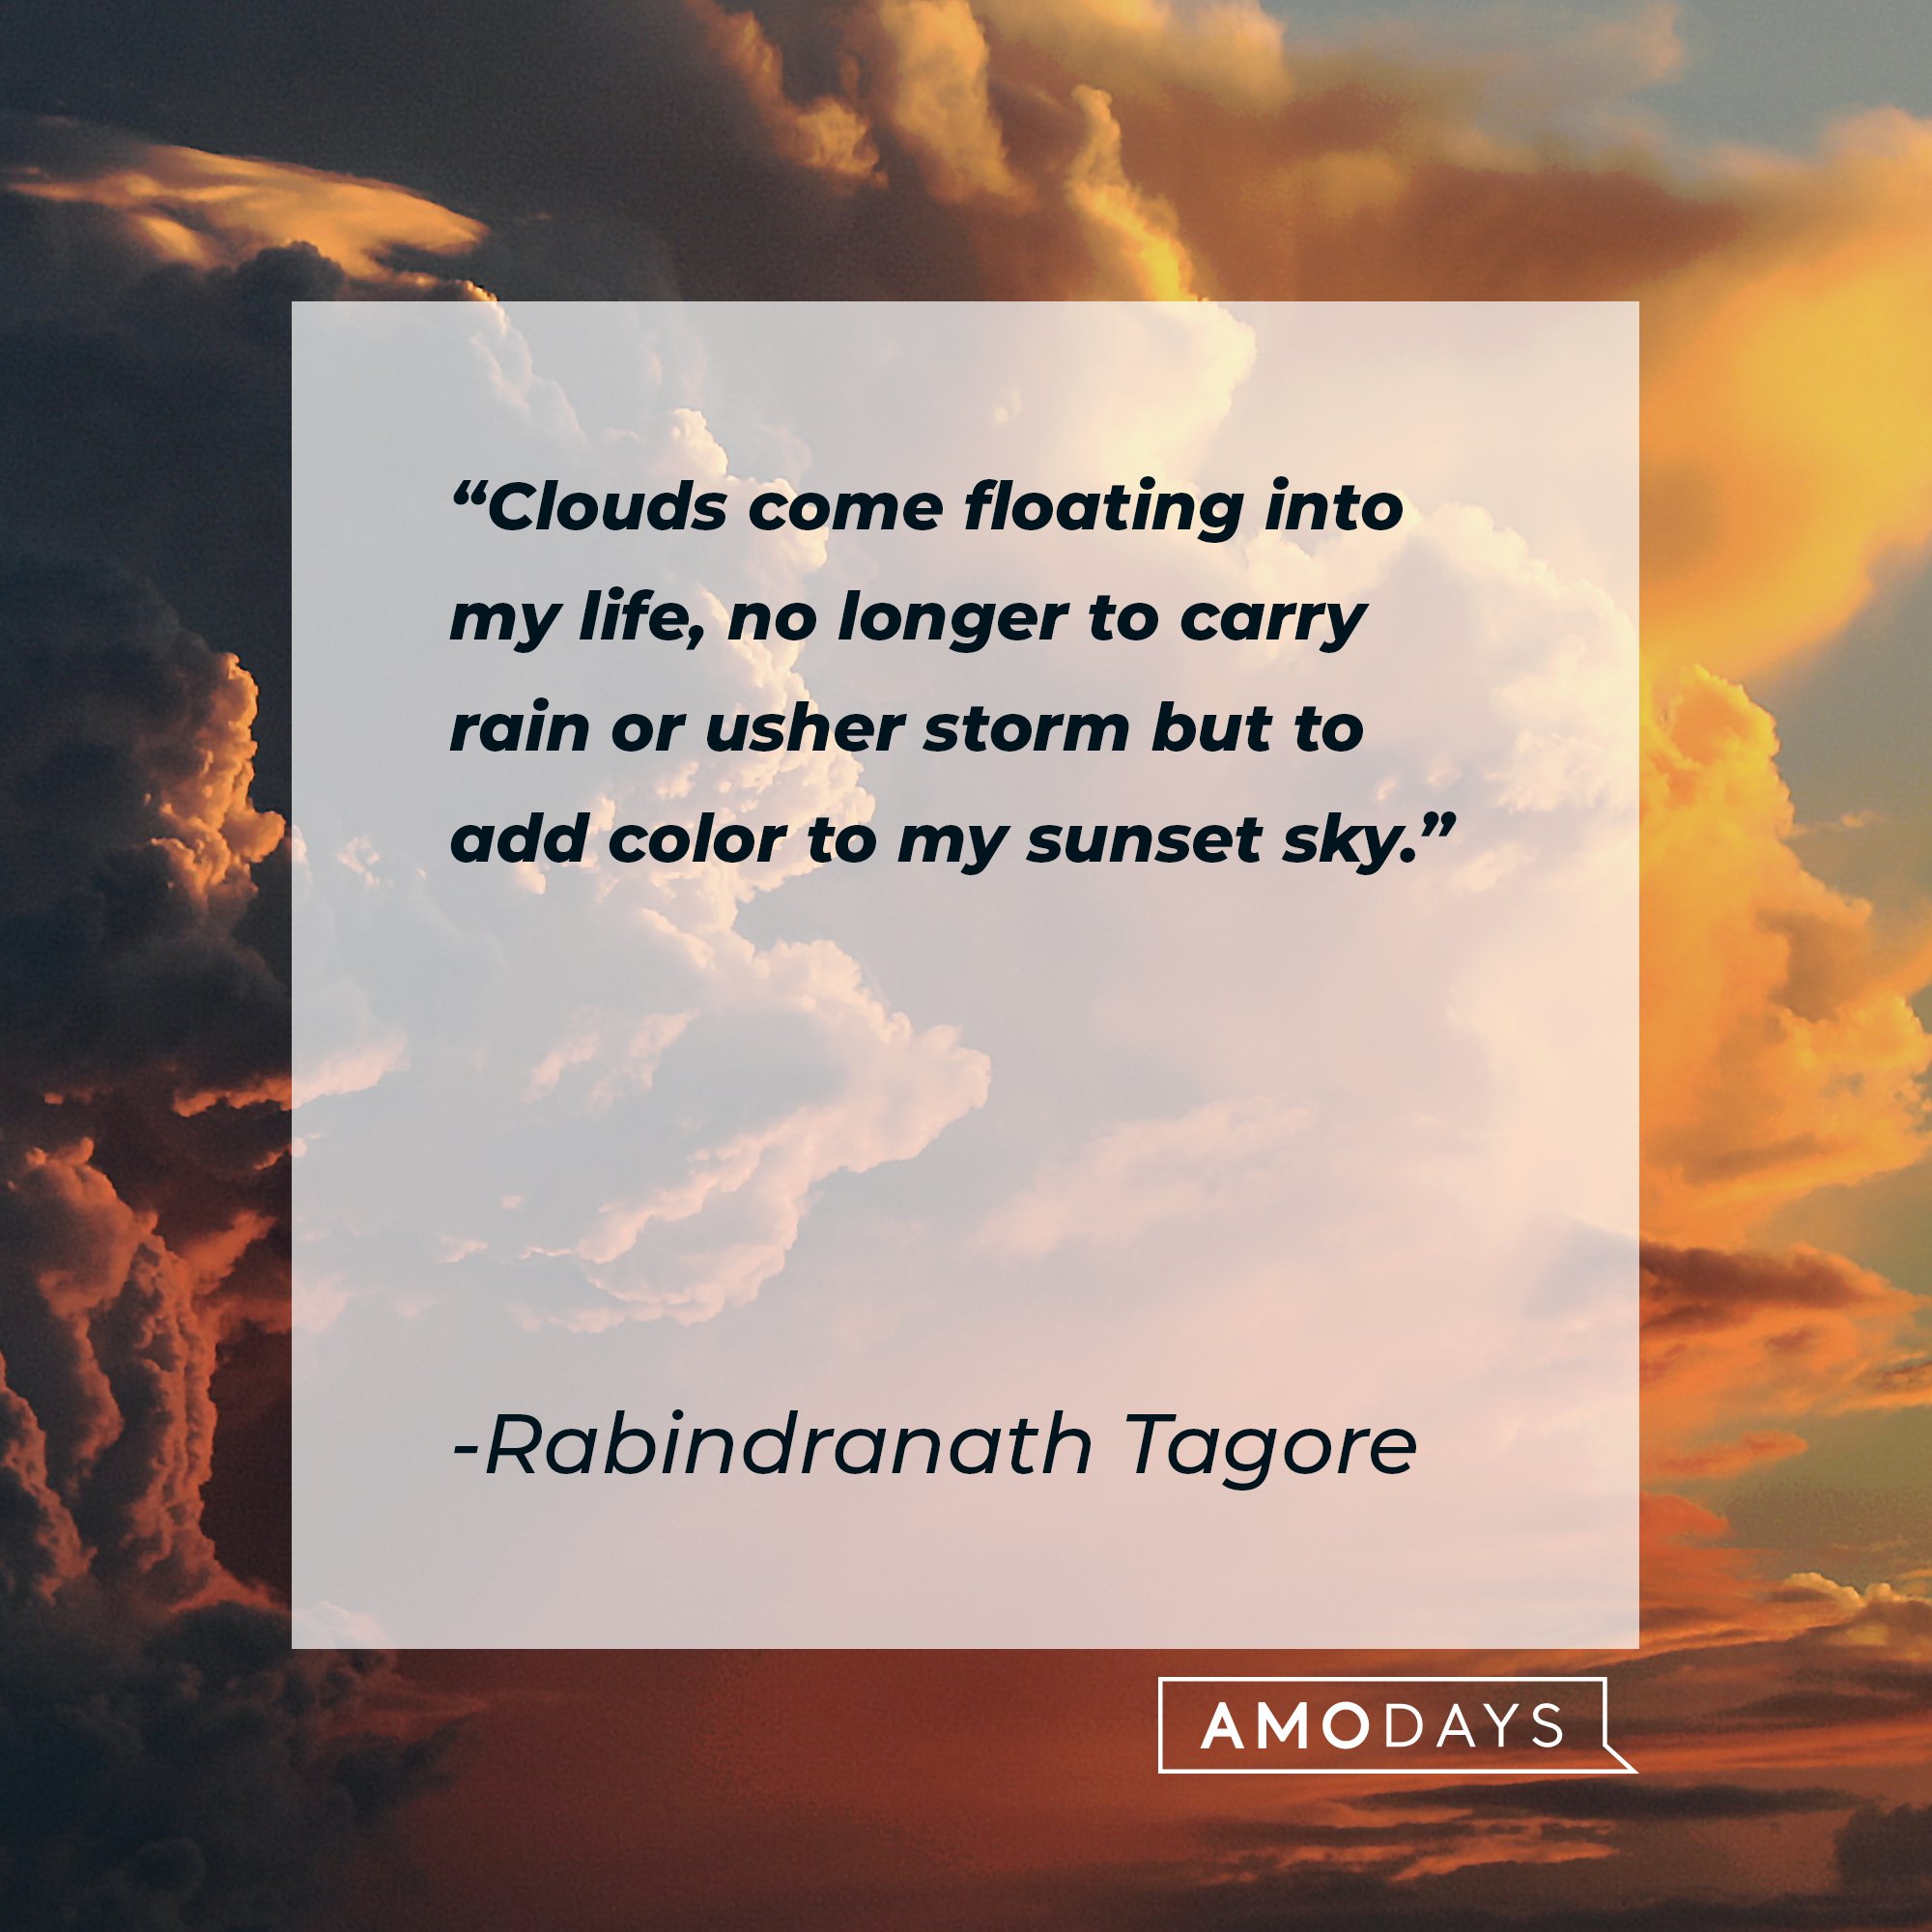 Rabindranath Tagore’s quote: "Clouds come floating into my life, no longer to carry rain or usher storm but to add color to my sunset sky." | Image: AmoDays